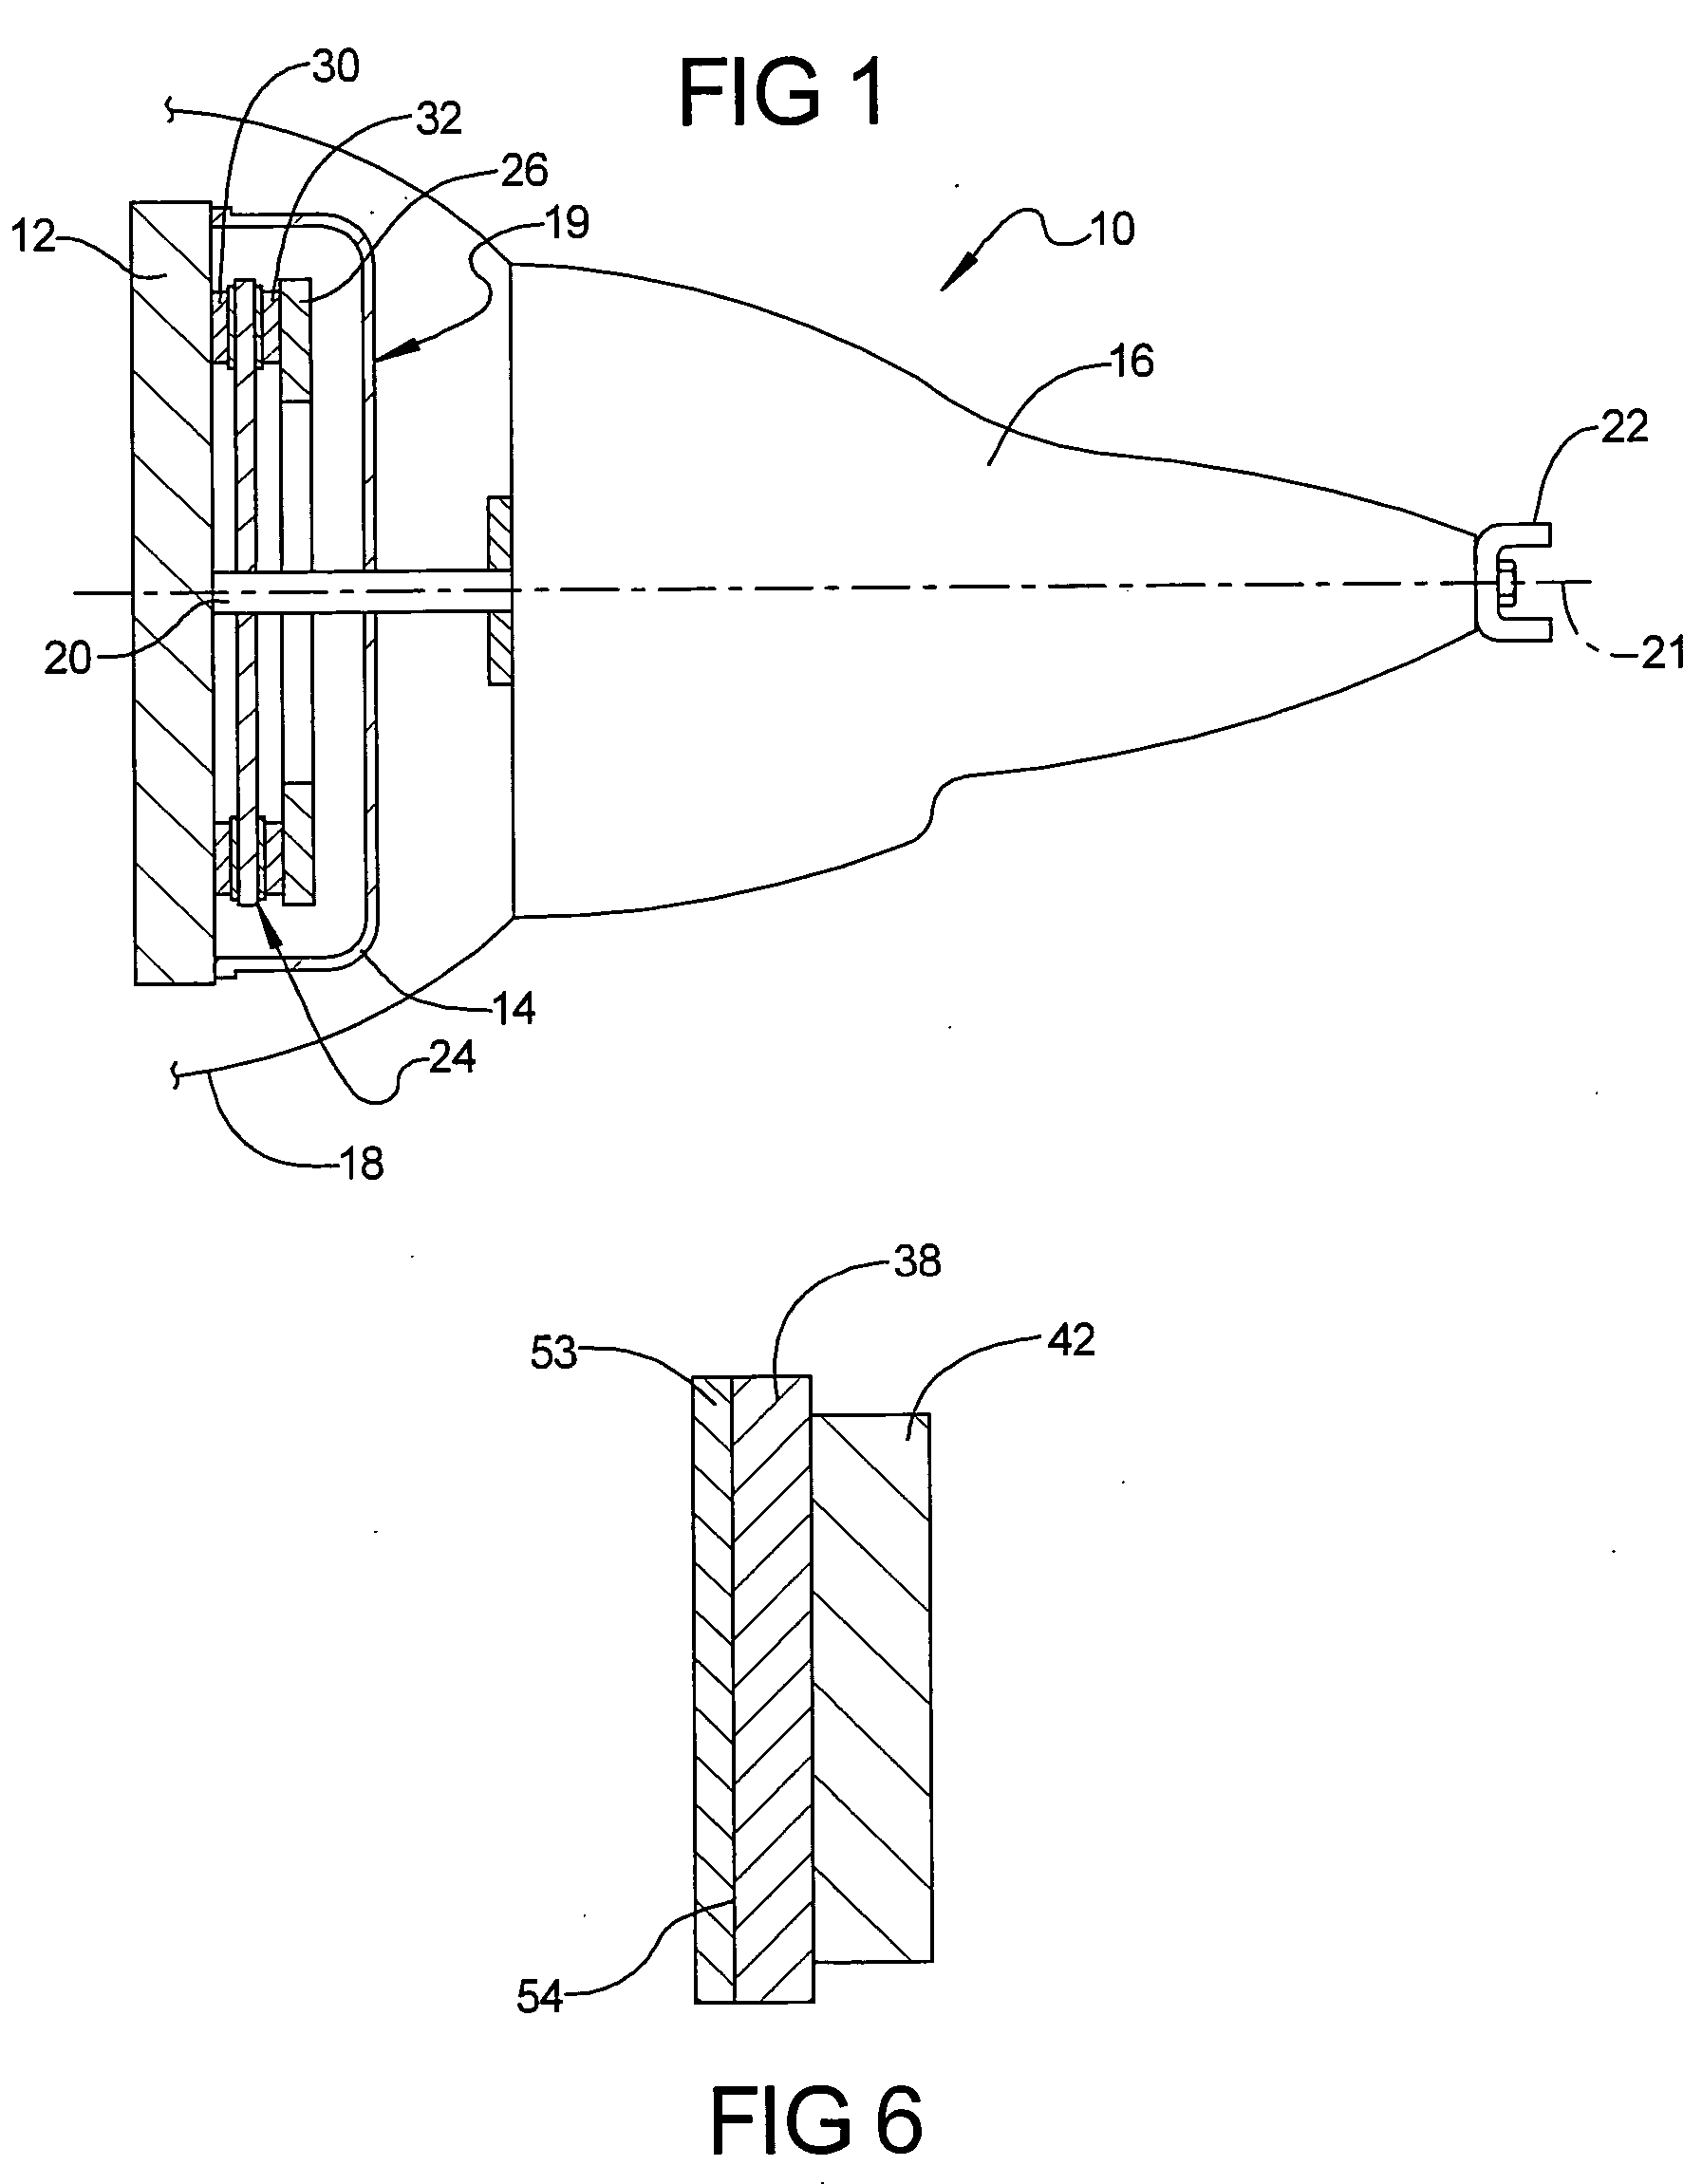 Clutch disc assembly with direct bond ceramic friction material